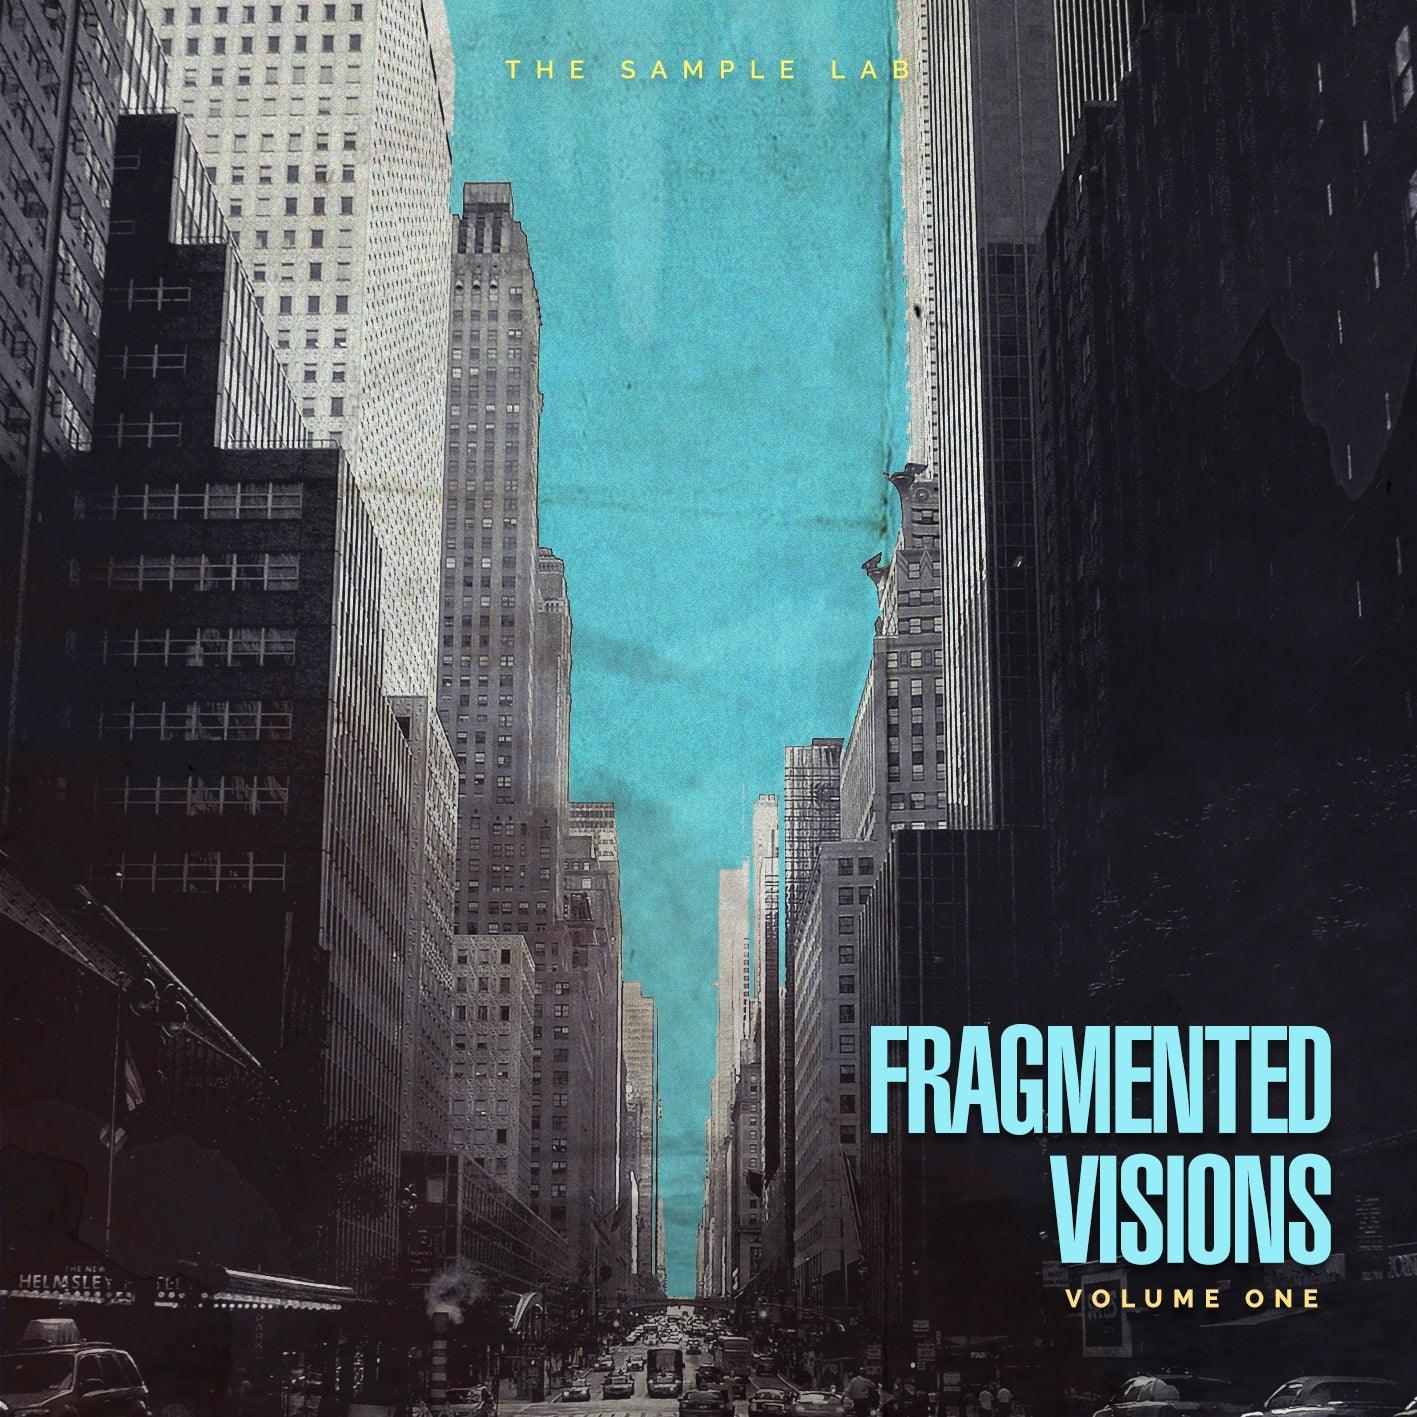 Fragmented Visions Vol. 1 (Remastered) - The Sample Lab